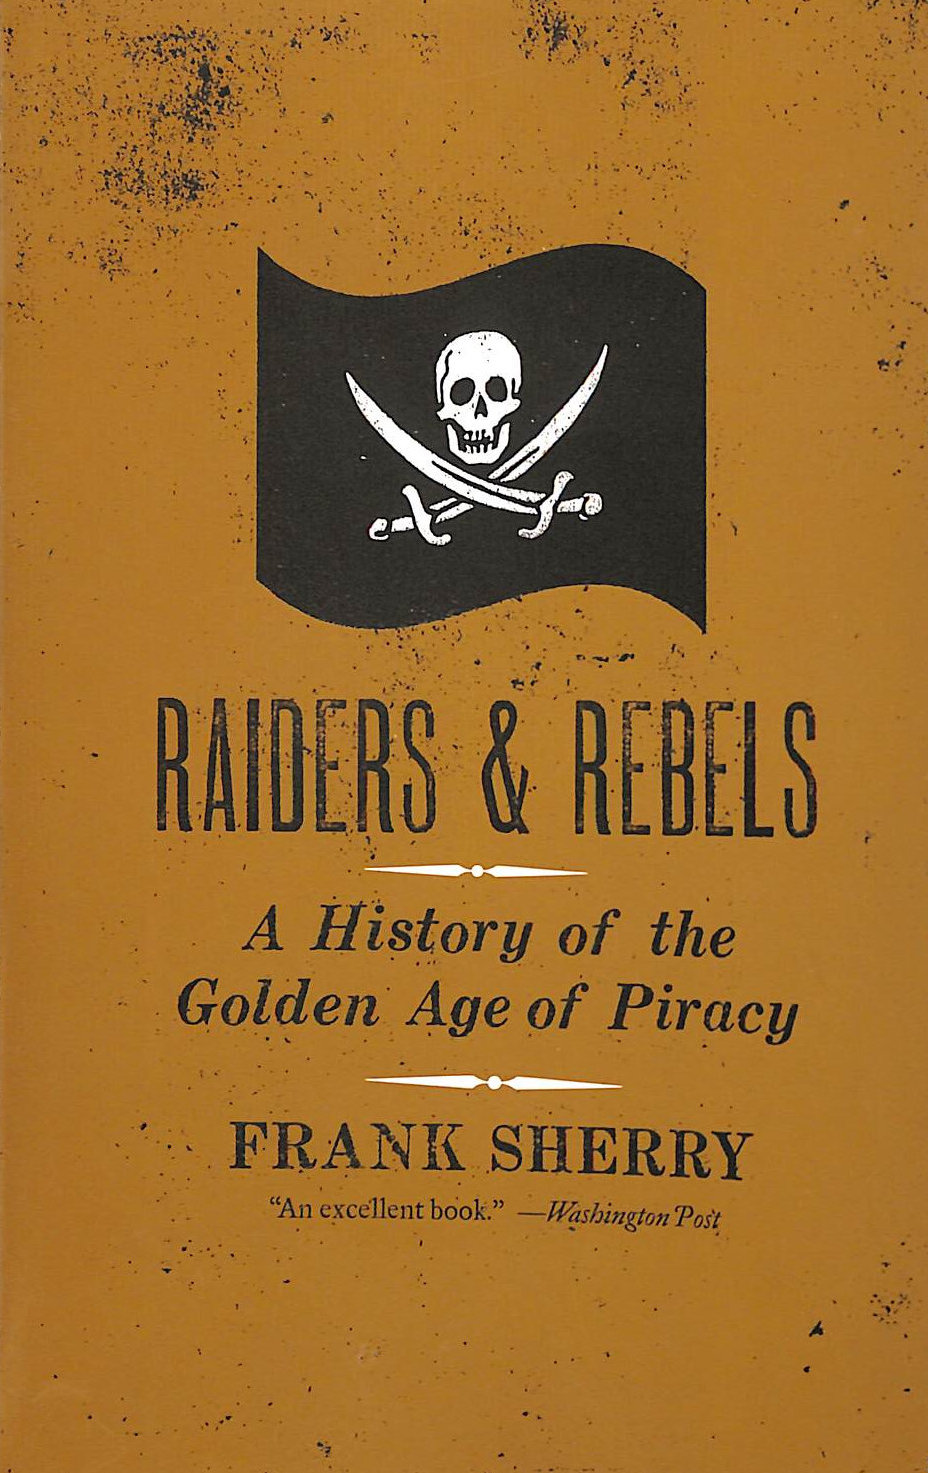 SHERRY, FRANK - Raiders and Rebels: A History of the Golden Age of Piracy